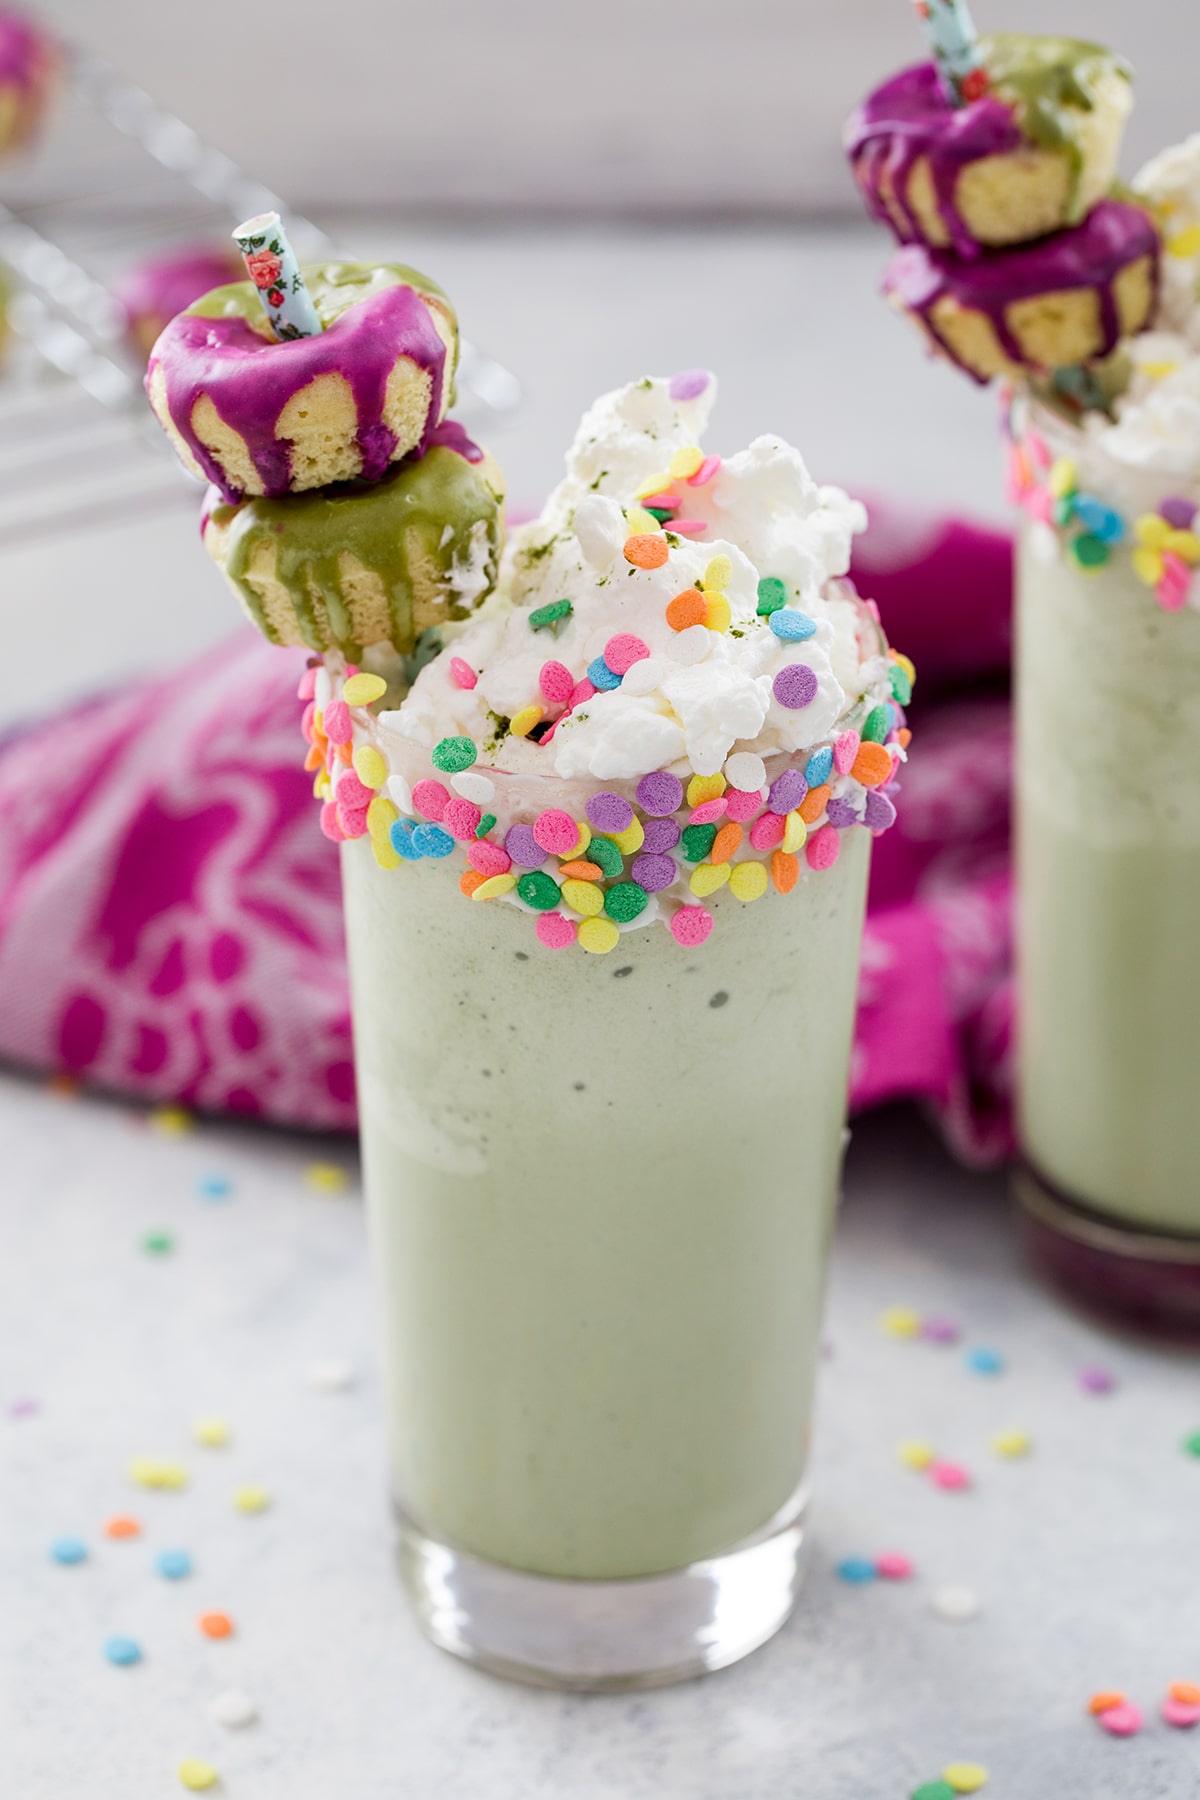 Overhead view of matcha milkshake with sprinkles rim, whipped cream, and mini donut garnish with second milkshake in the background and sprinkles all around.